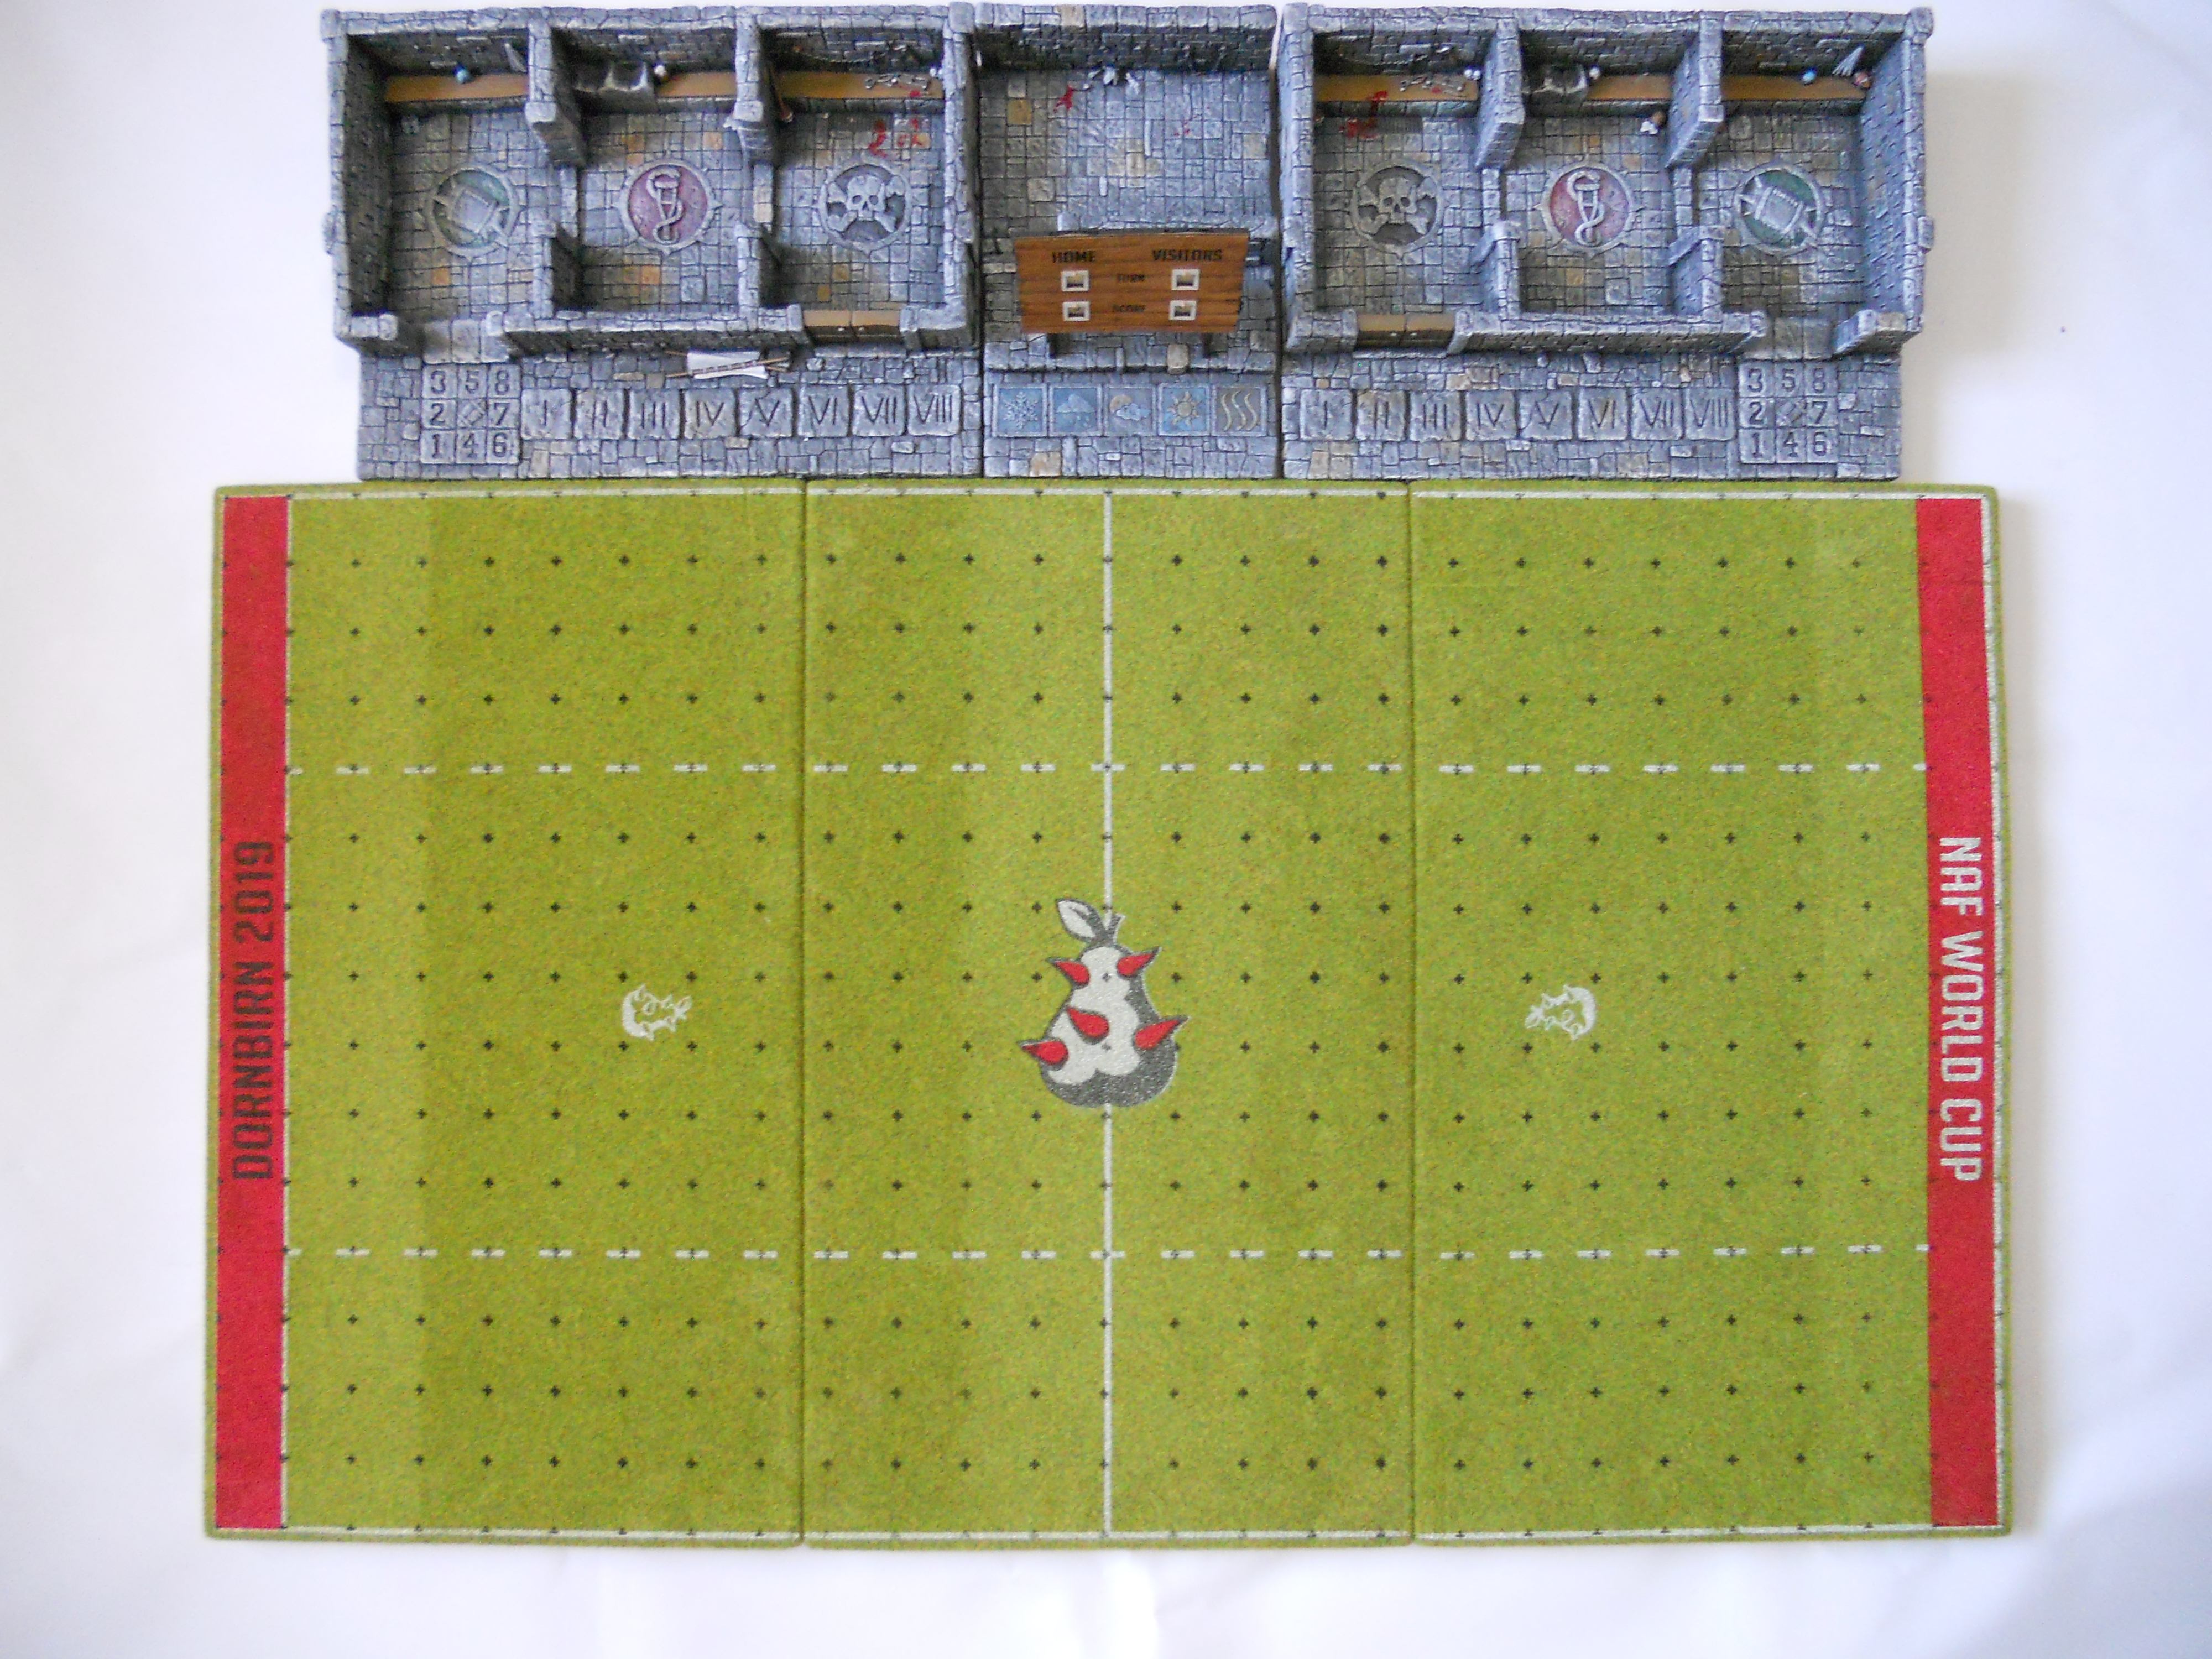 Top View Pitch